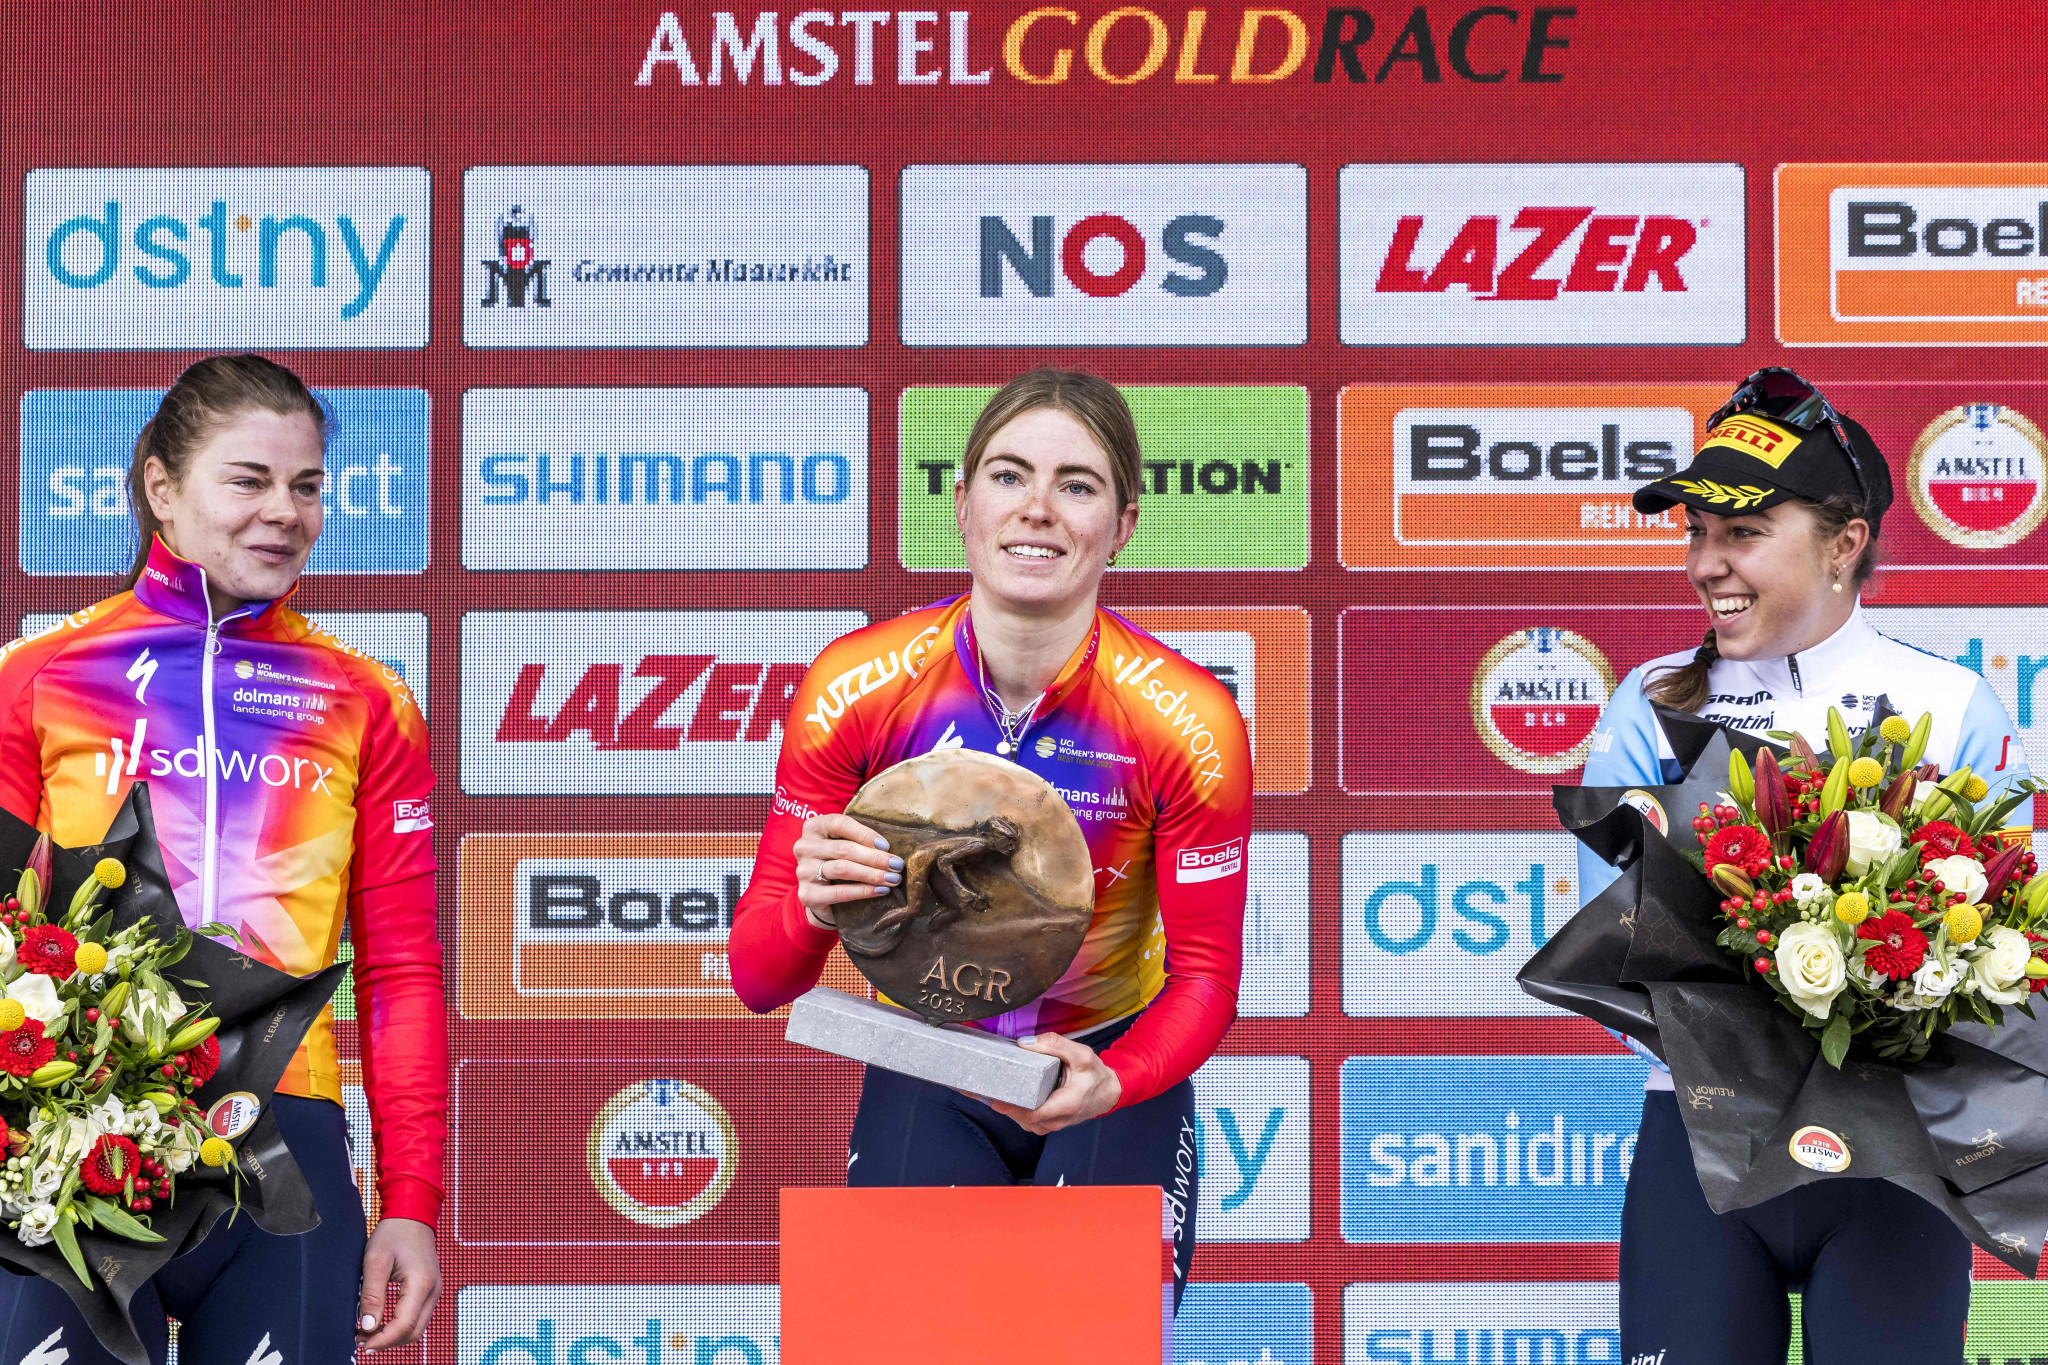 Vollering improves on two second places to win Amstel Gold Race